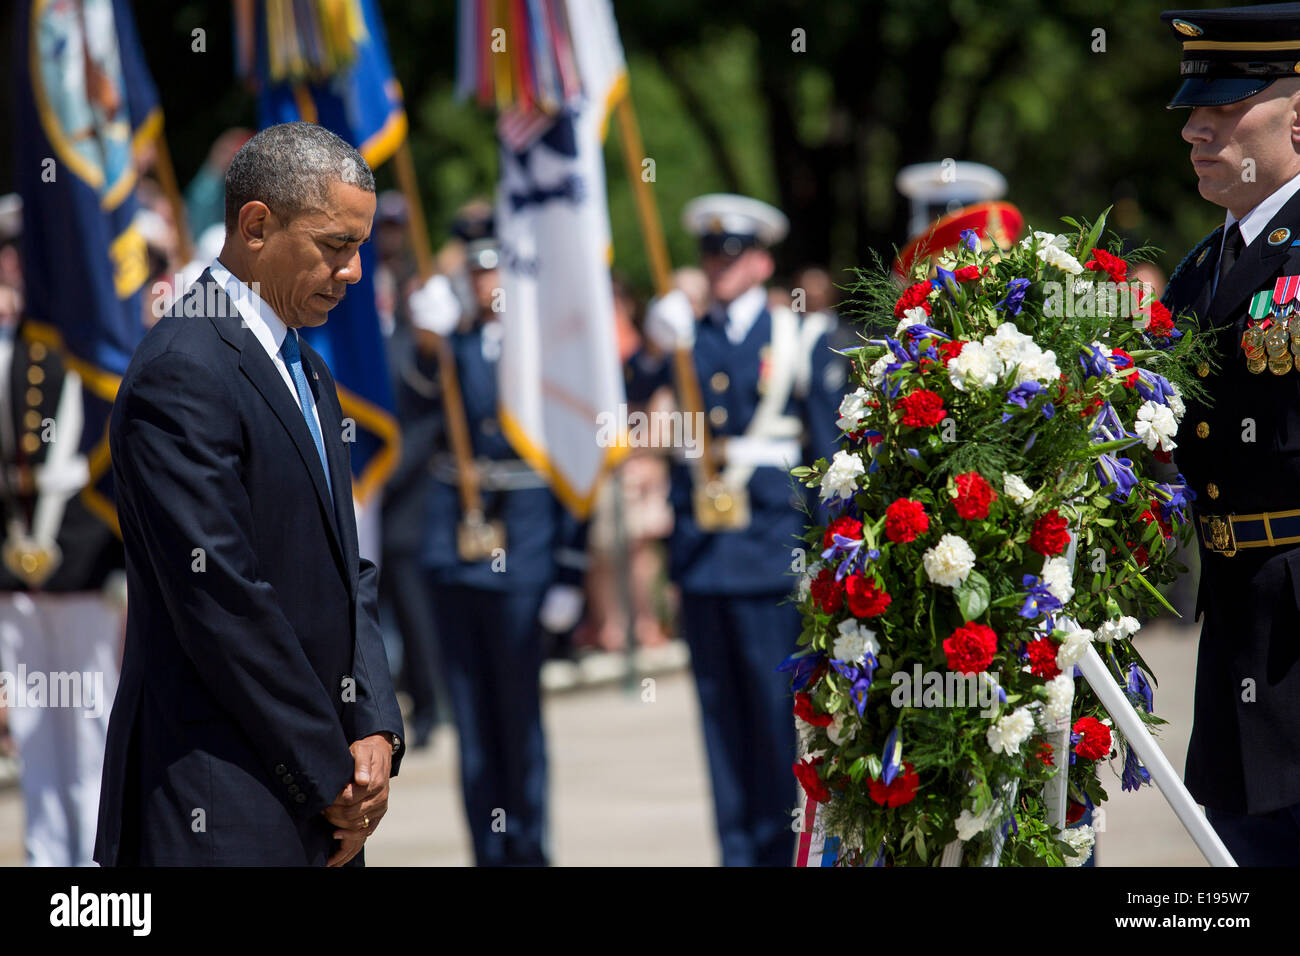 Arlington, Virginia. 26th May, 2014. United States President Barack Obama pauses after laying a wreath at the Tomb of the Unknown Soldier at Arlington National Cemetery, May 26, 2014 in Arlington, Virginia. President Obama returned to Washington Monday morning after a surprise visit to Afghanistan to visit U.S. troops at Bagram Air Field. Credit: Drew Angerer/Pool via CNP/dpa/Alamy Live News Stock Photo